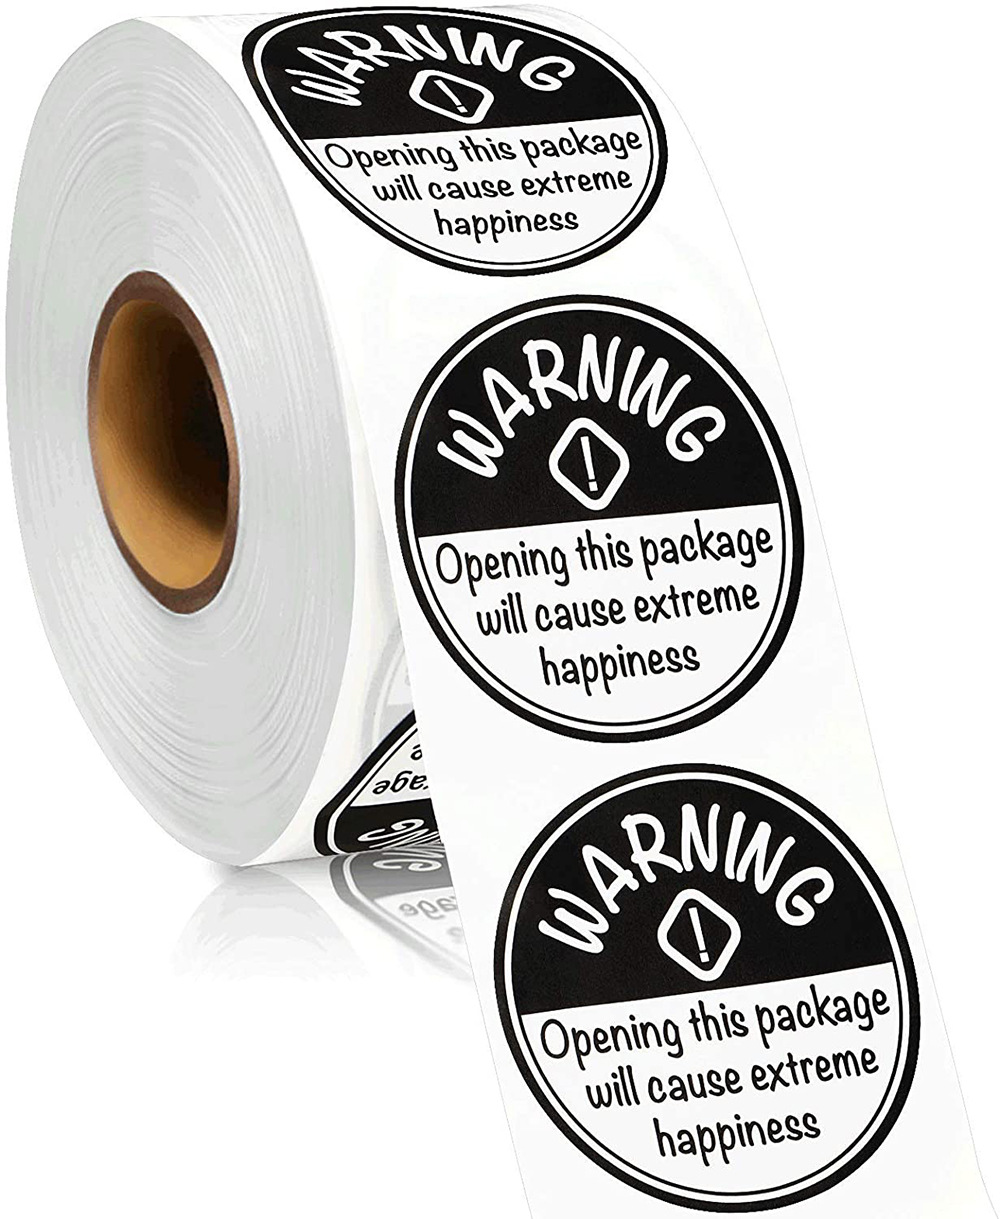 Extreme Happiness Stickers Warning Labels Round Warning Stickers Self-Adhesive Labels Crafting Tags Arts Decorations For Festival, Business Or Personal Use, 1.5 Inch